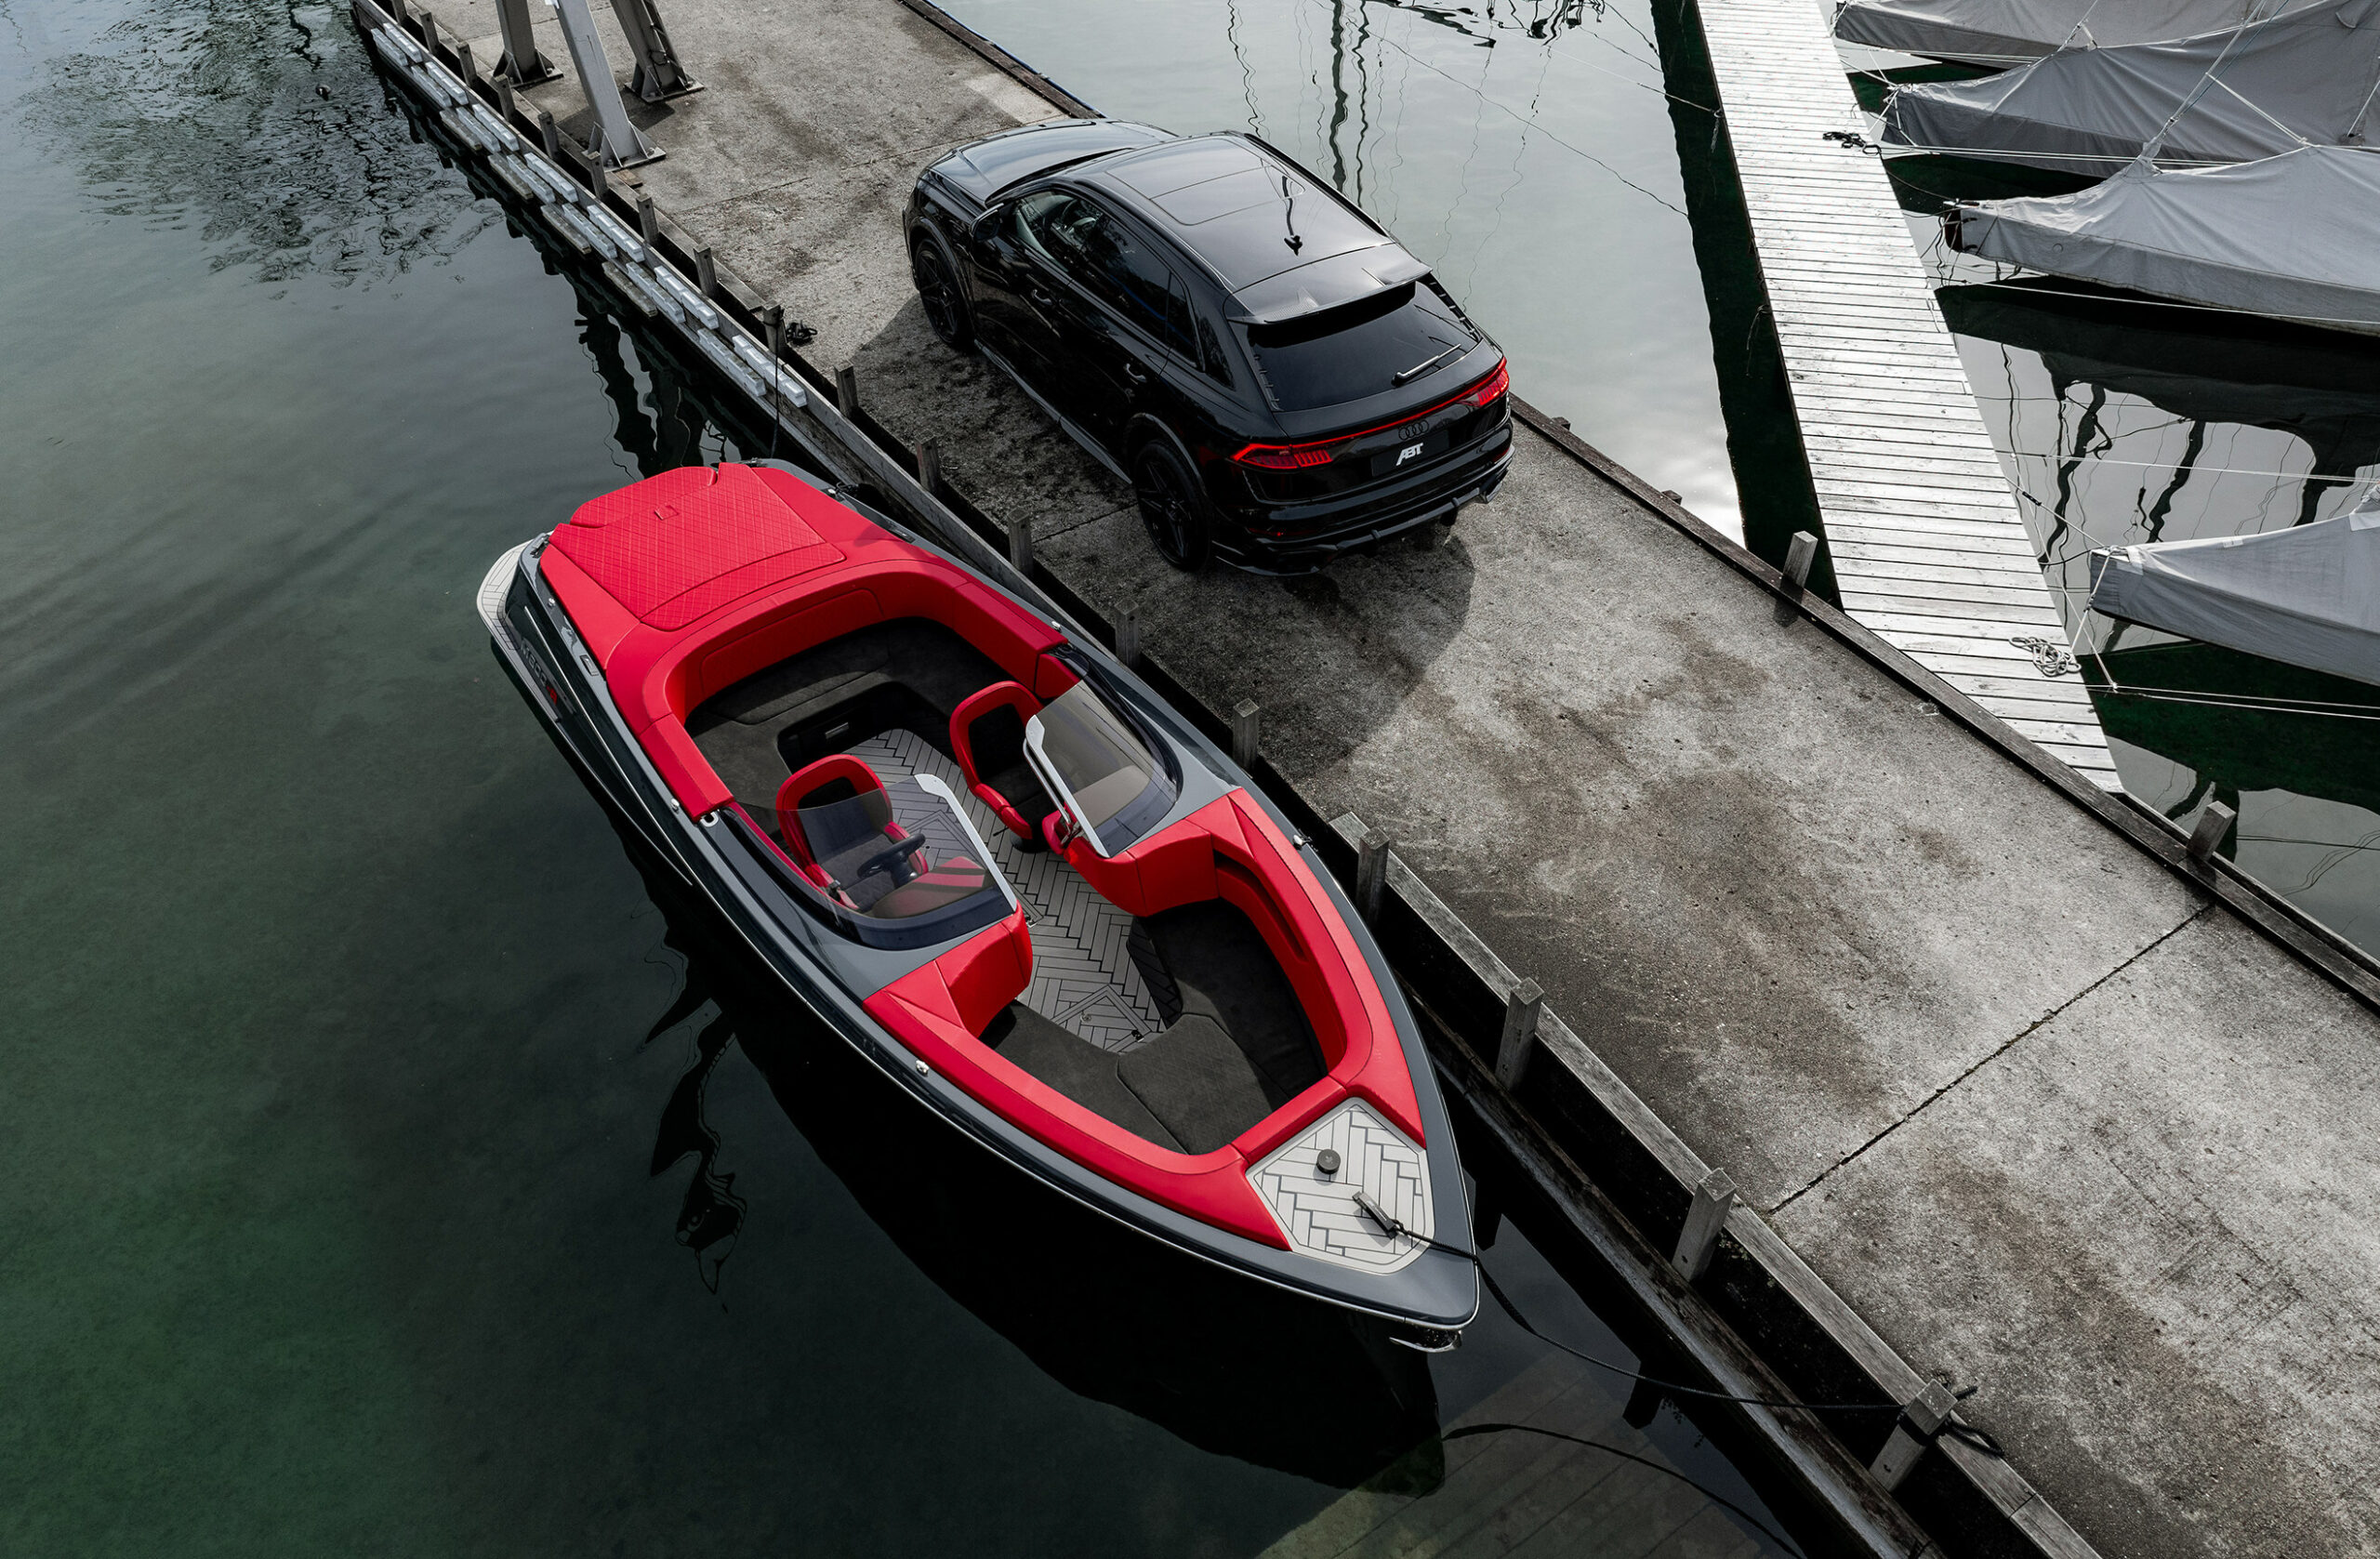 Discover the luxurious ABT | Marian M 800-R electric yacht with 450 kW power, 85 km/h top speed, and elegant design. Limited edition, premiering at the Formula E race in Monaco.